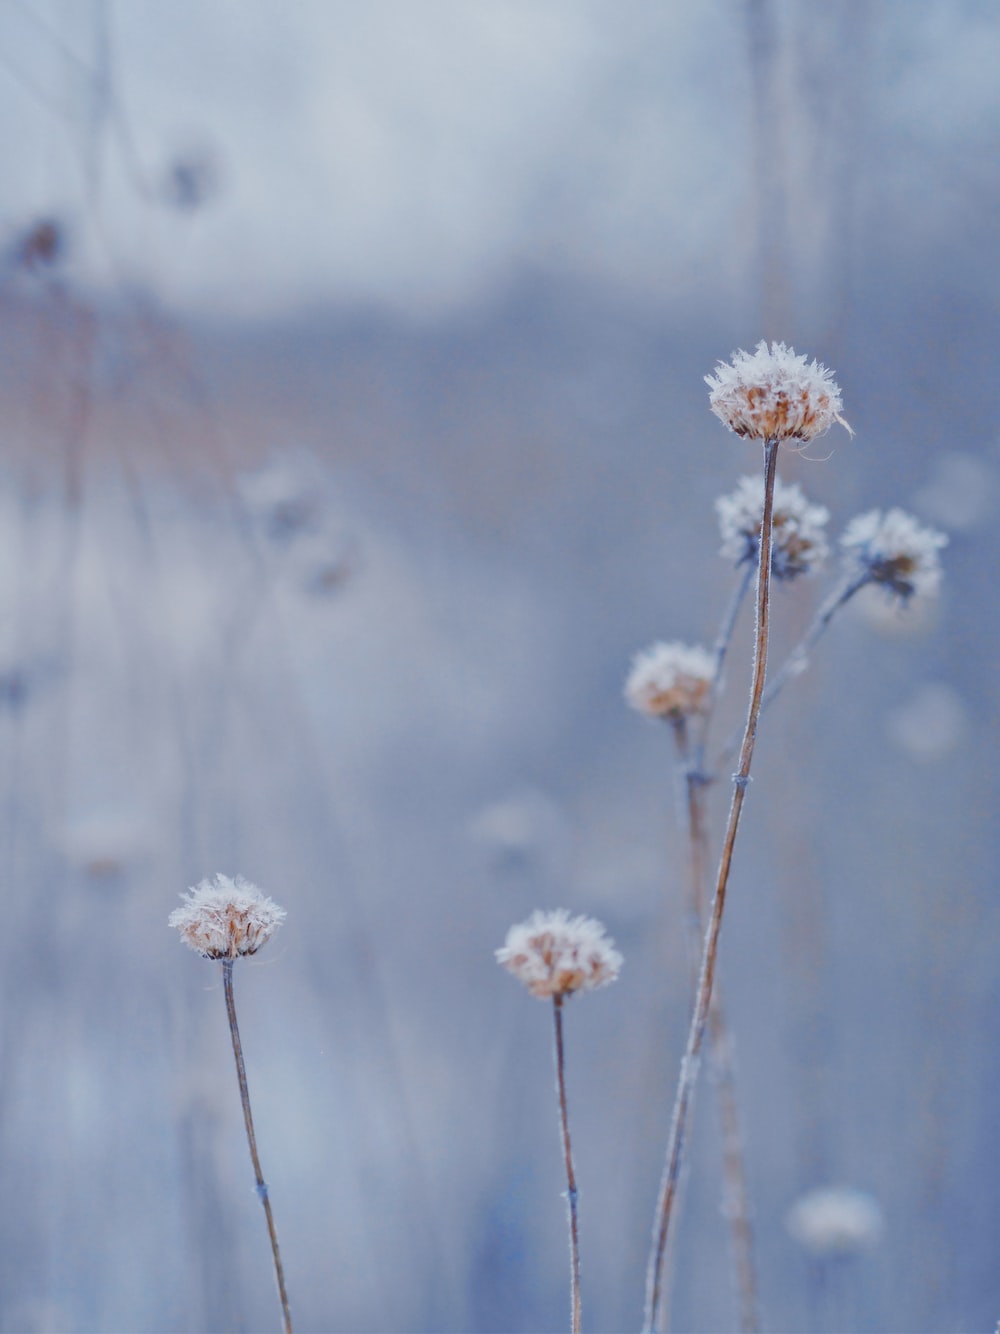 Winter Flower Picture. Download Free Image